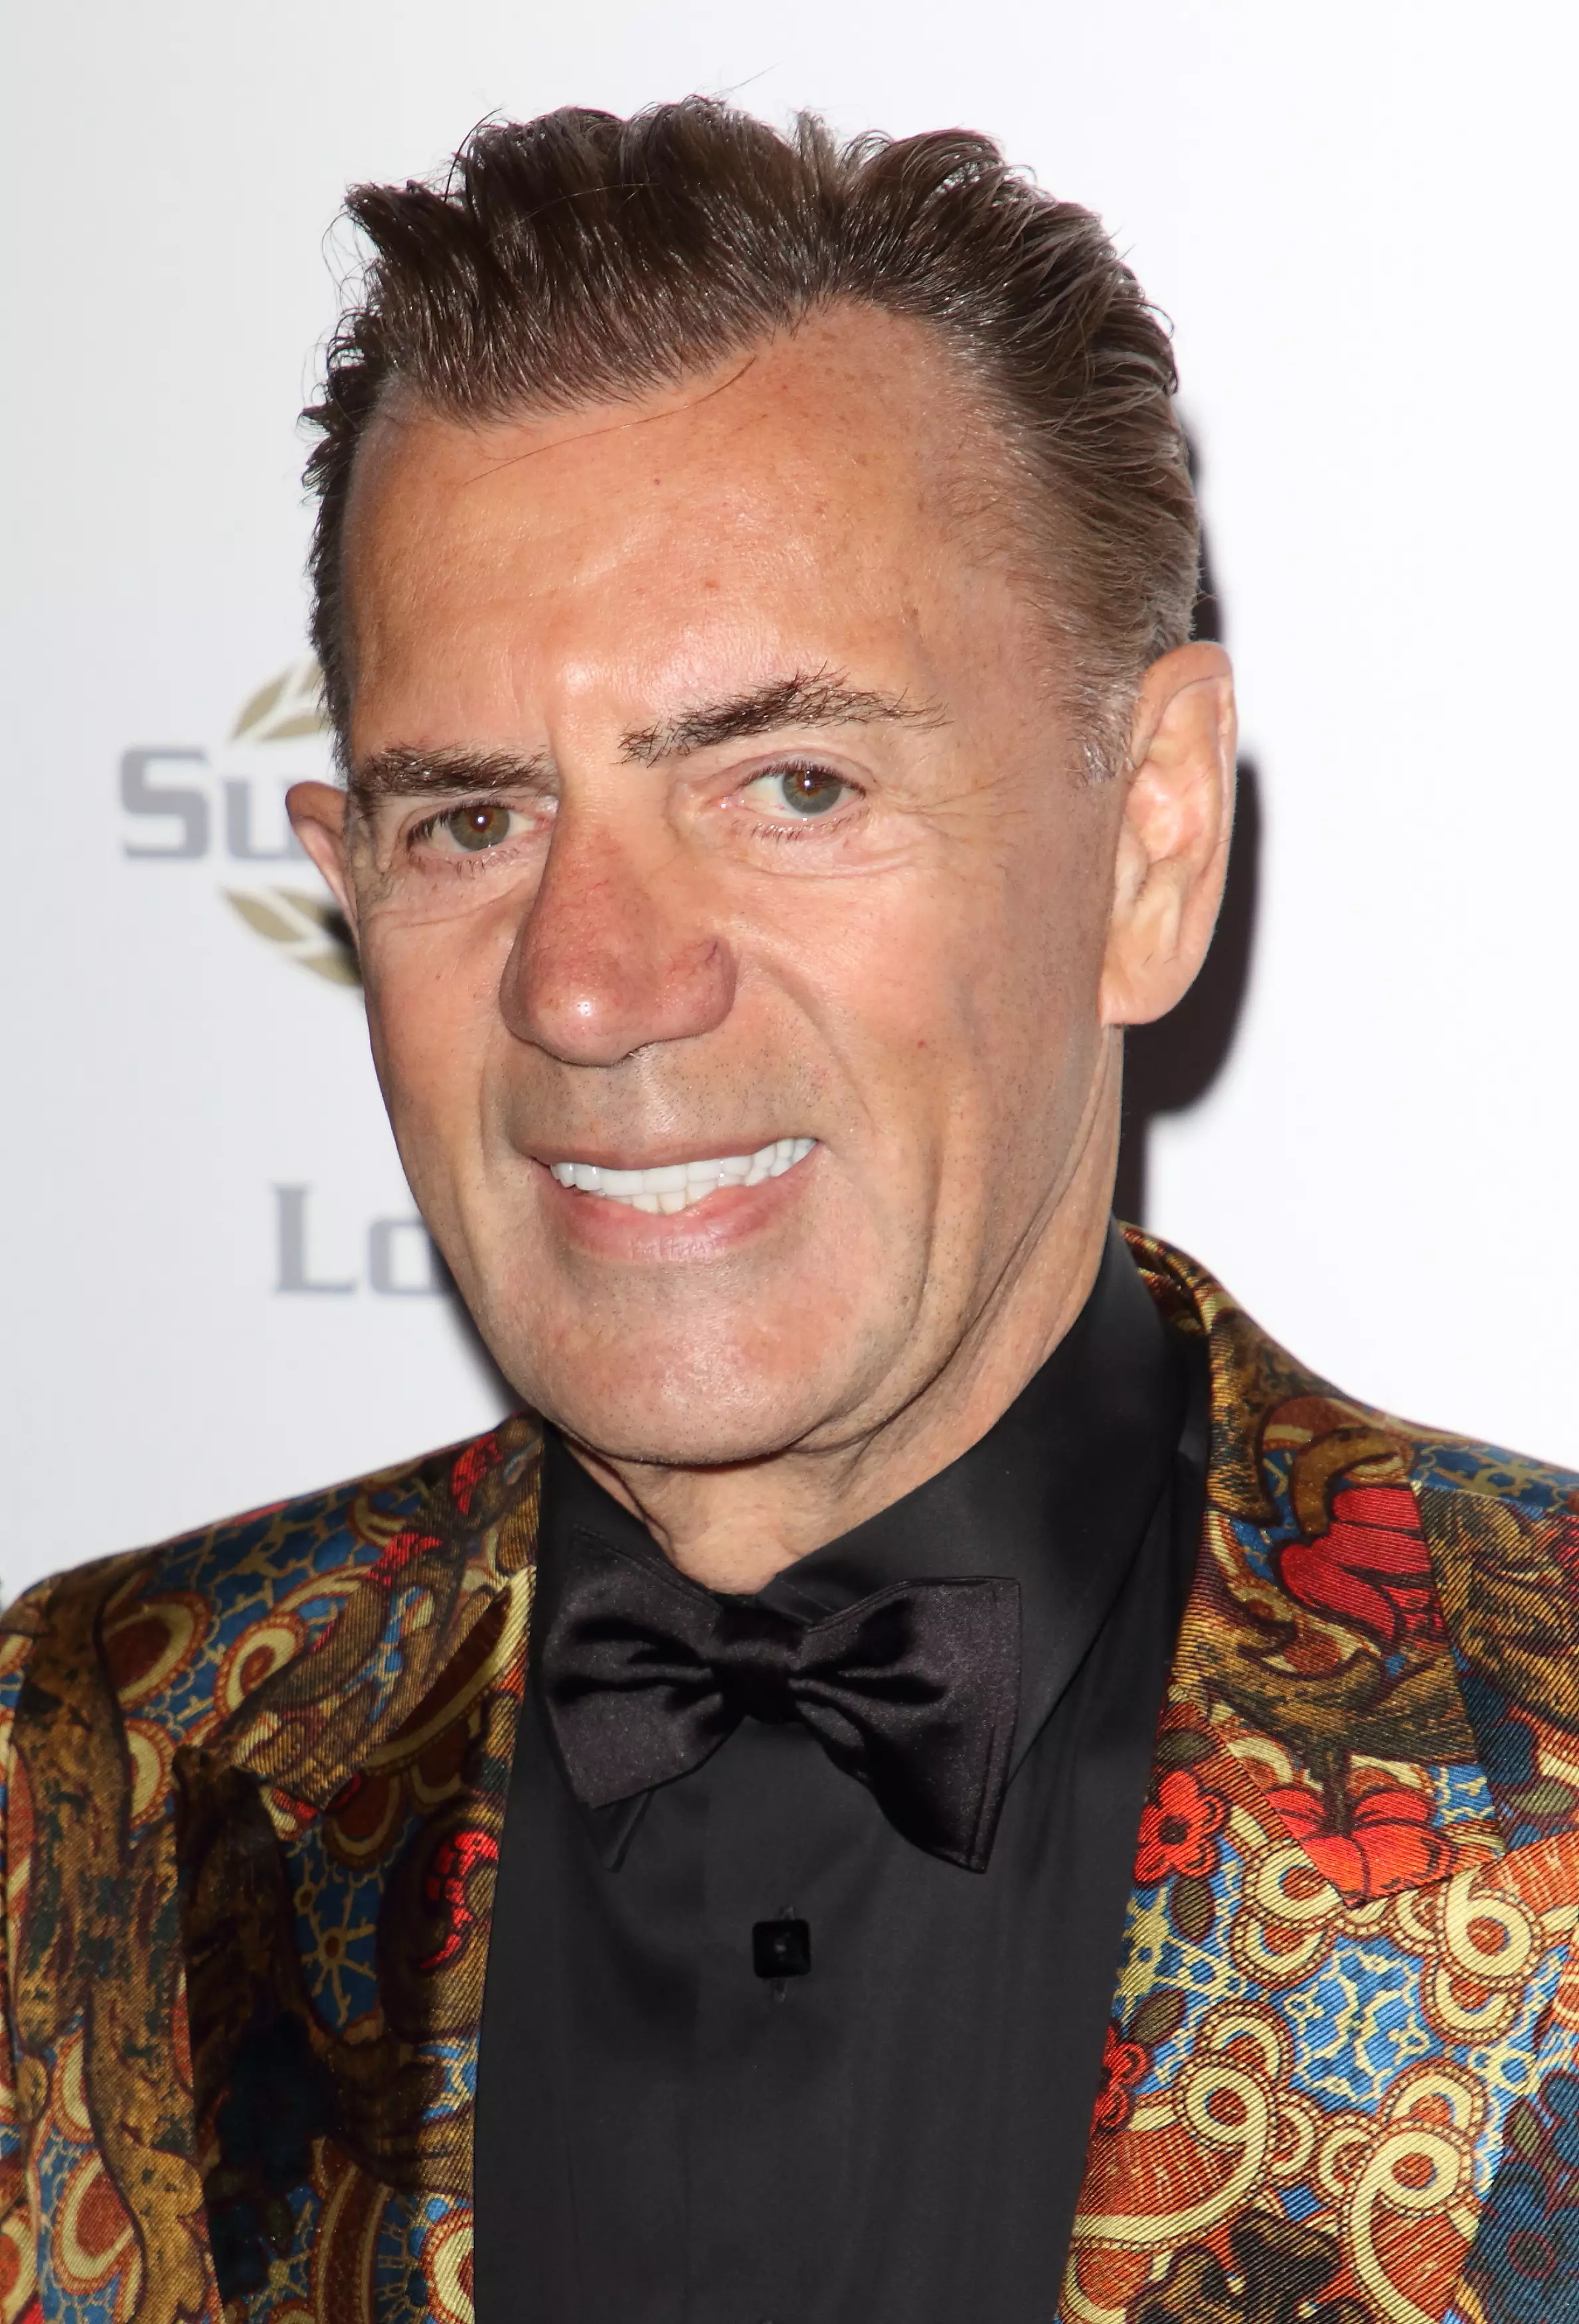 Duncan Bannatyne also hit out at those capable of relying on other resources.